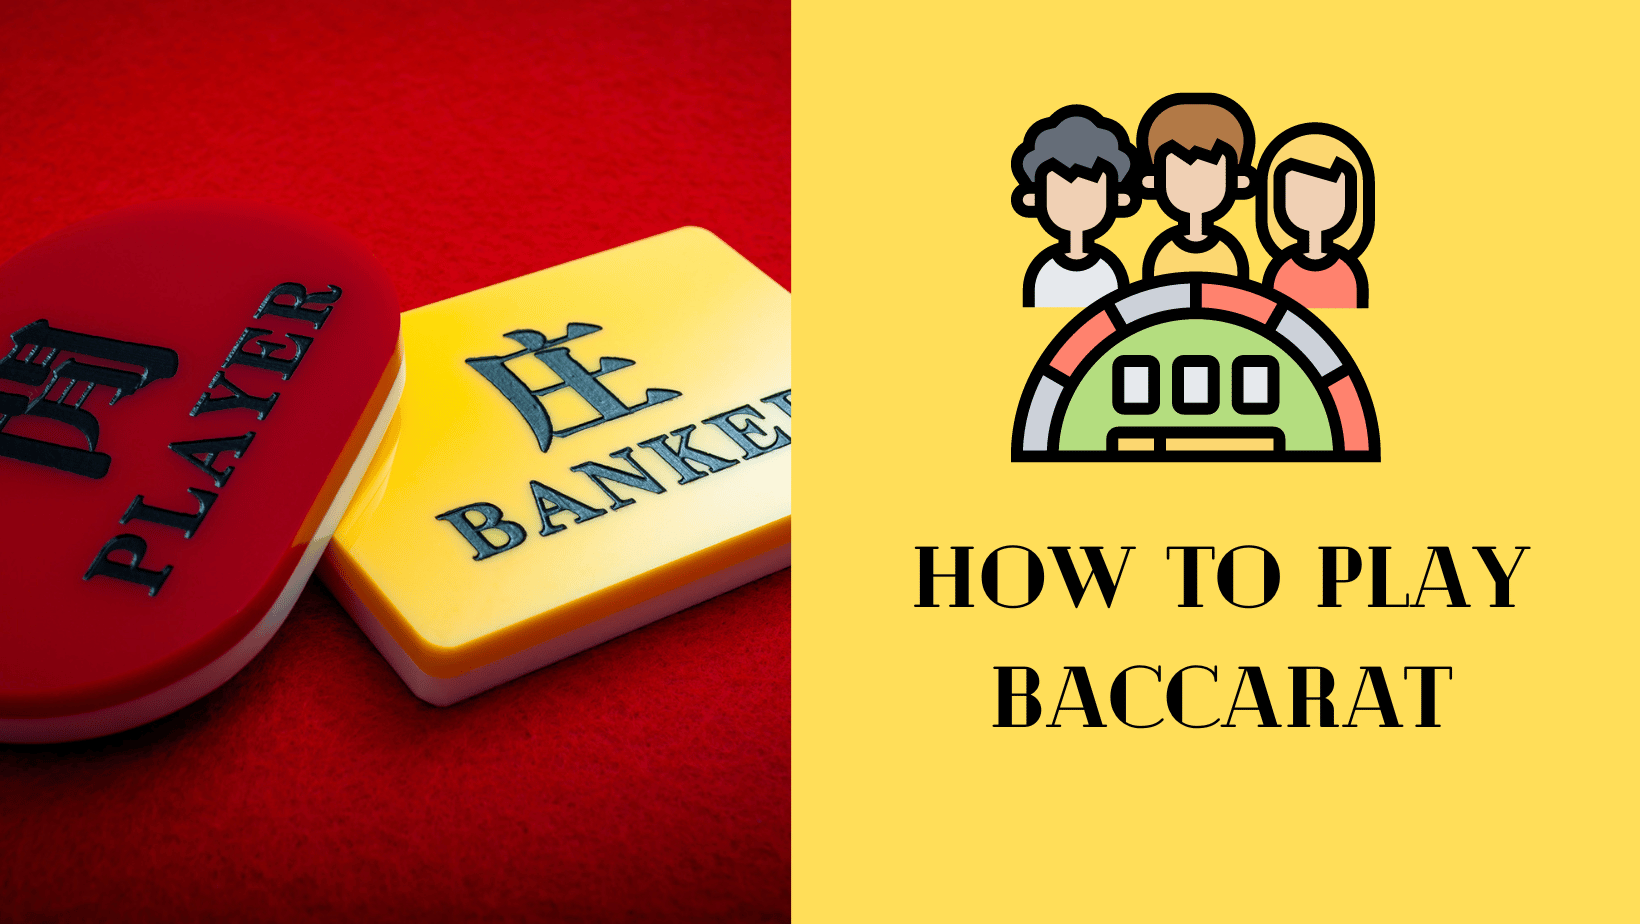 How to Baccarat